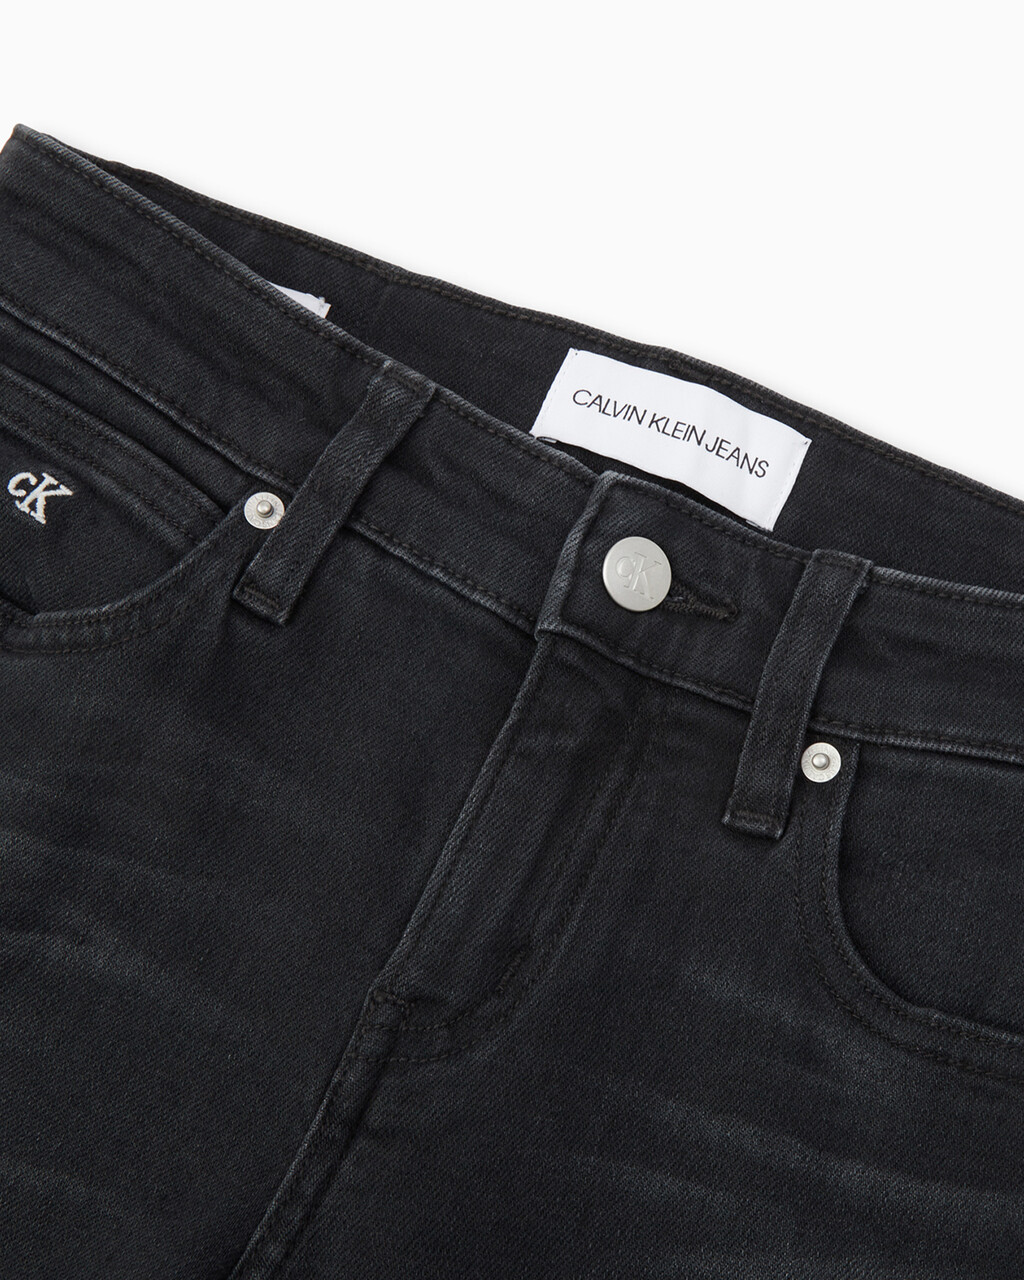 Core Body Fit Jeans, Acd Wash Black, hi-res